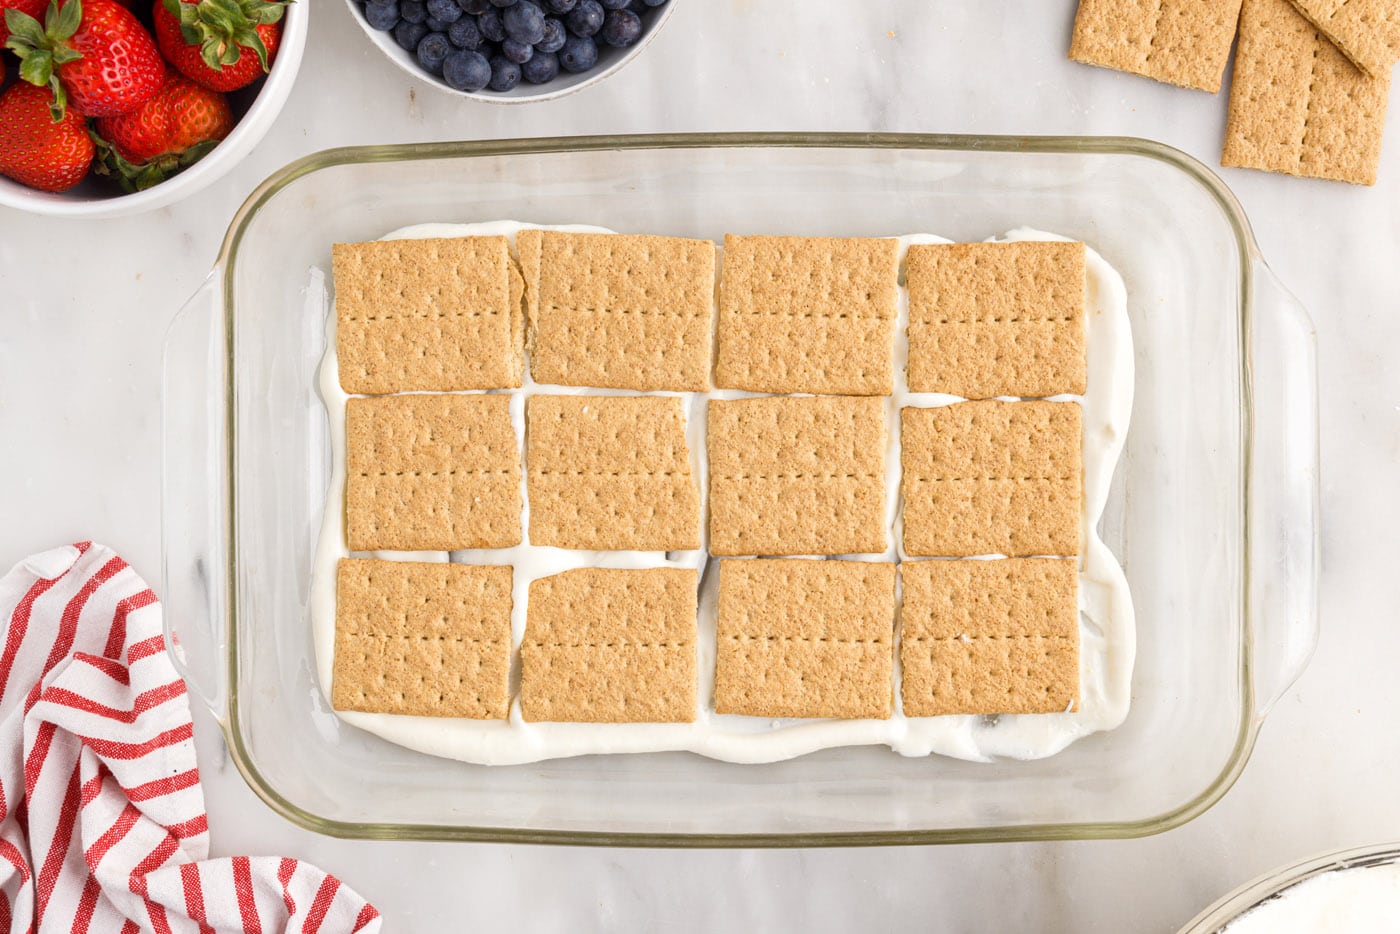 graham crackers layered on top of cool whip pudding mixture